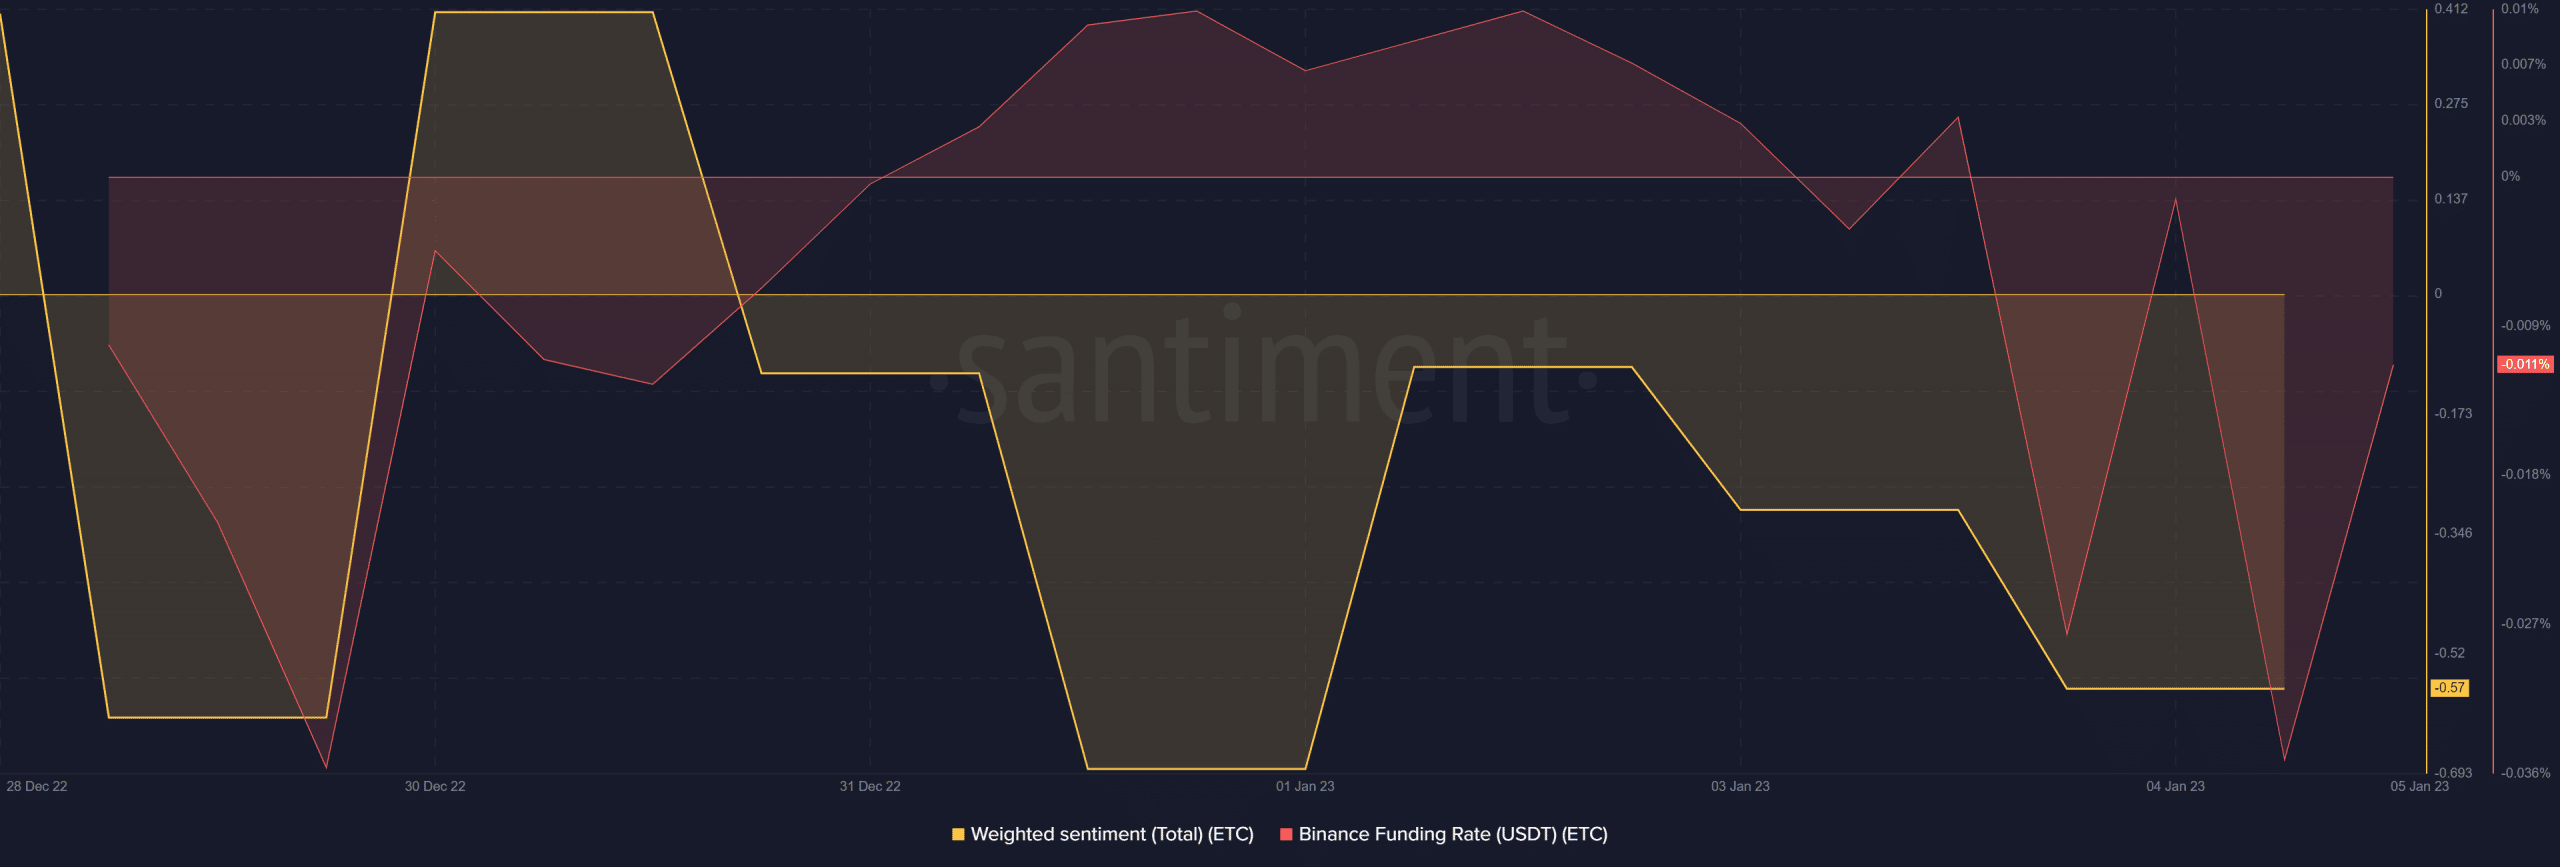 ETC weighted sentiment and Binance funding rate